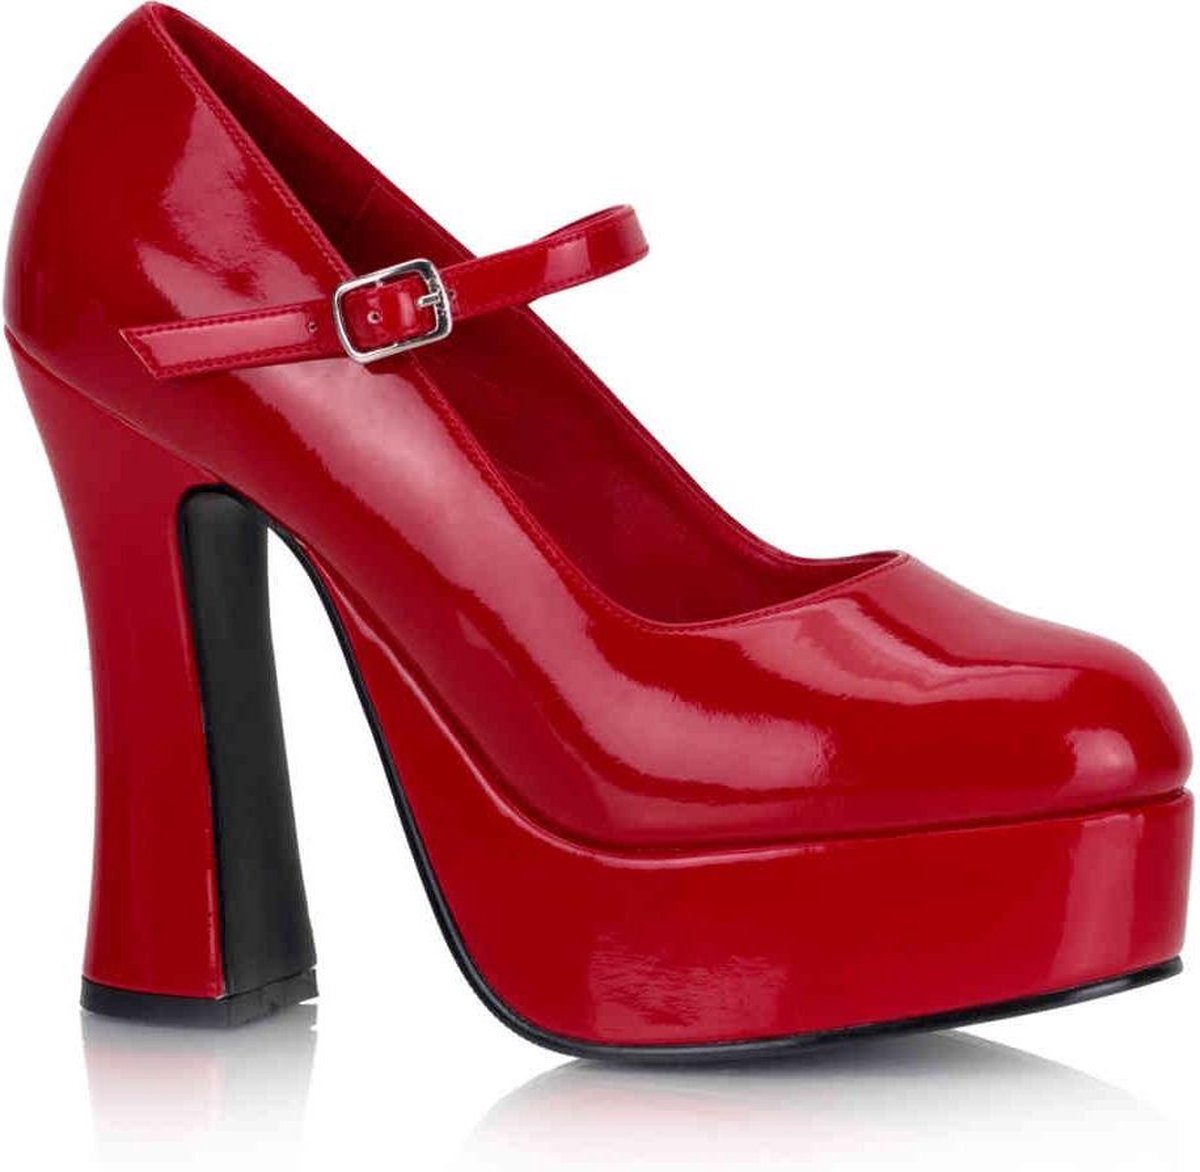 Demonia Dolly 50 red patent = )